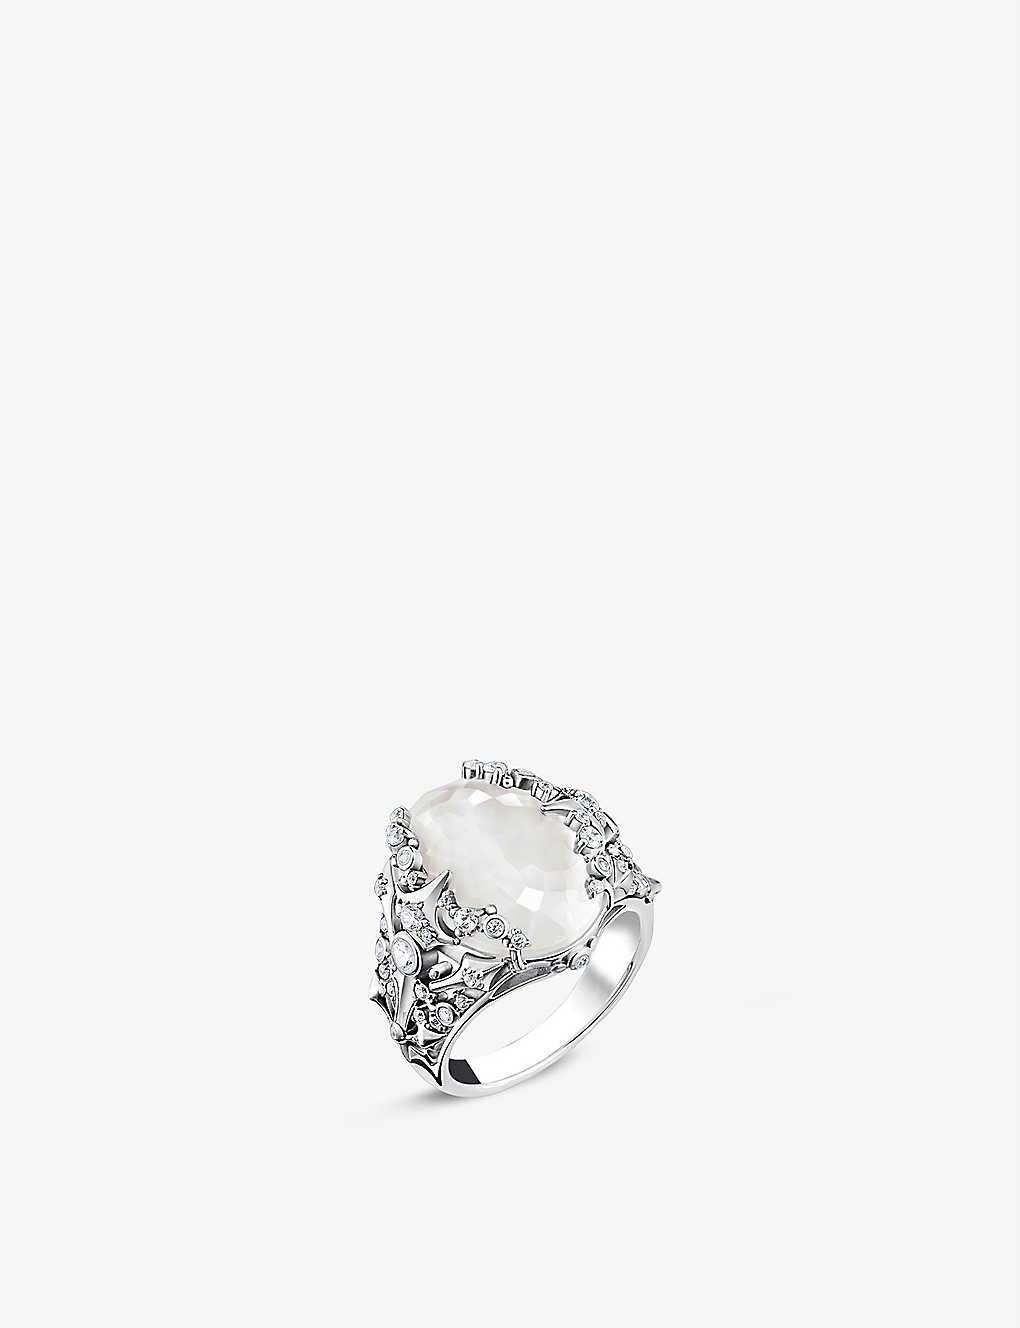 Thomas Sabo Women's White Embellished Sterling Silver, Zirconia And Milky Quartz Cocktail Ring